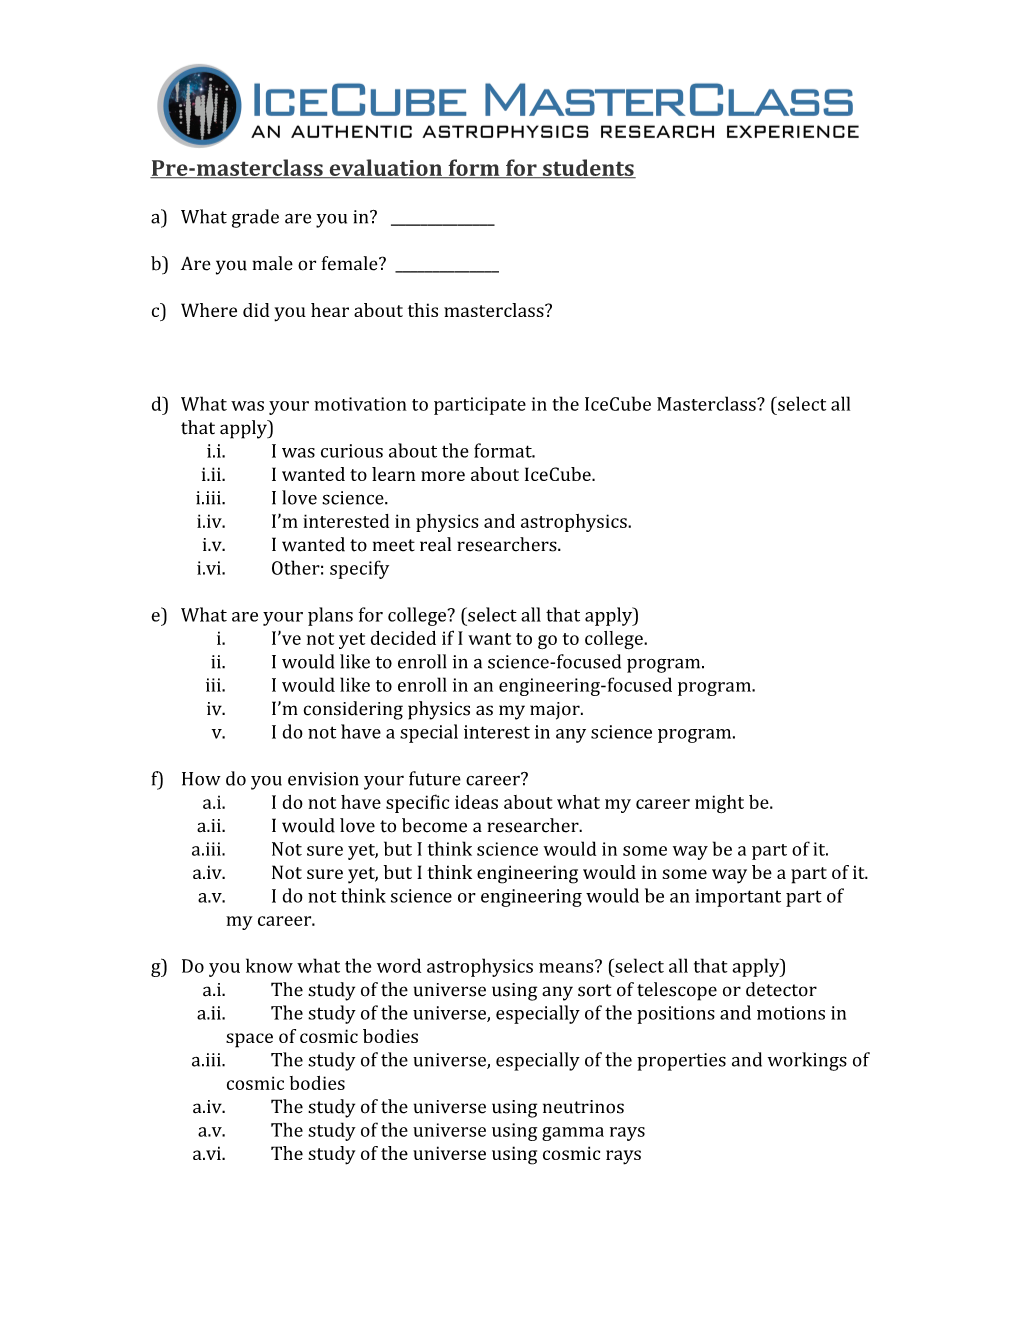 Pre-Masterclass Evaluation Form for Students